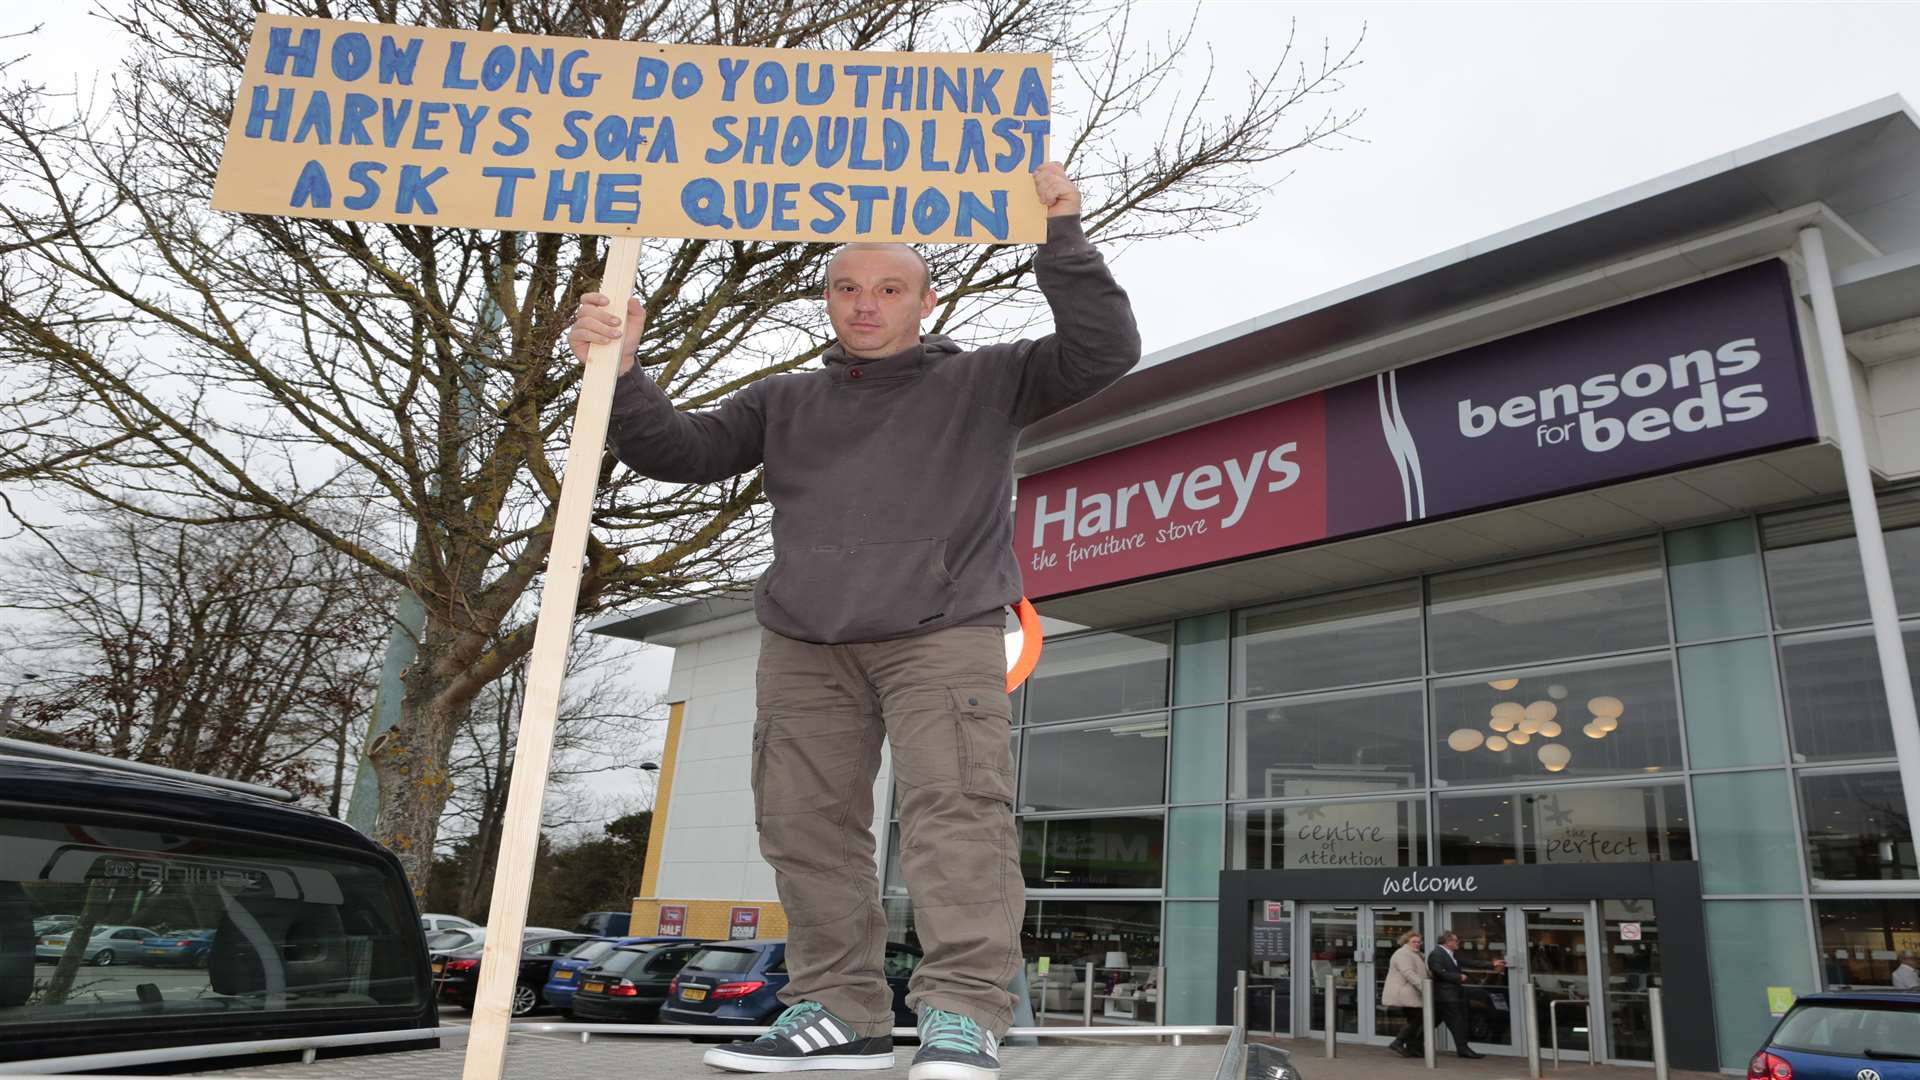 Ian Hayden, 44, from Paddock Wood, stages a protest outside Harverys after receiving bad customer service from the company